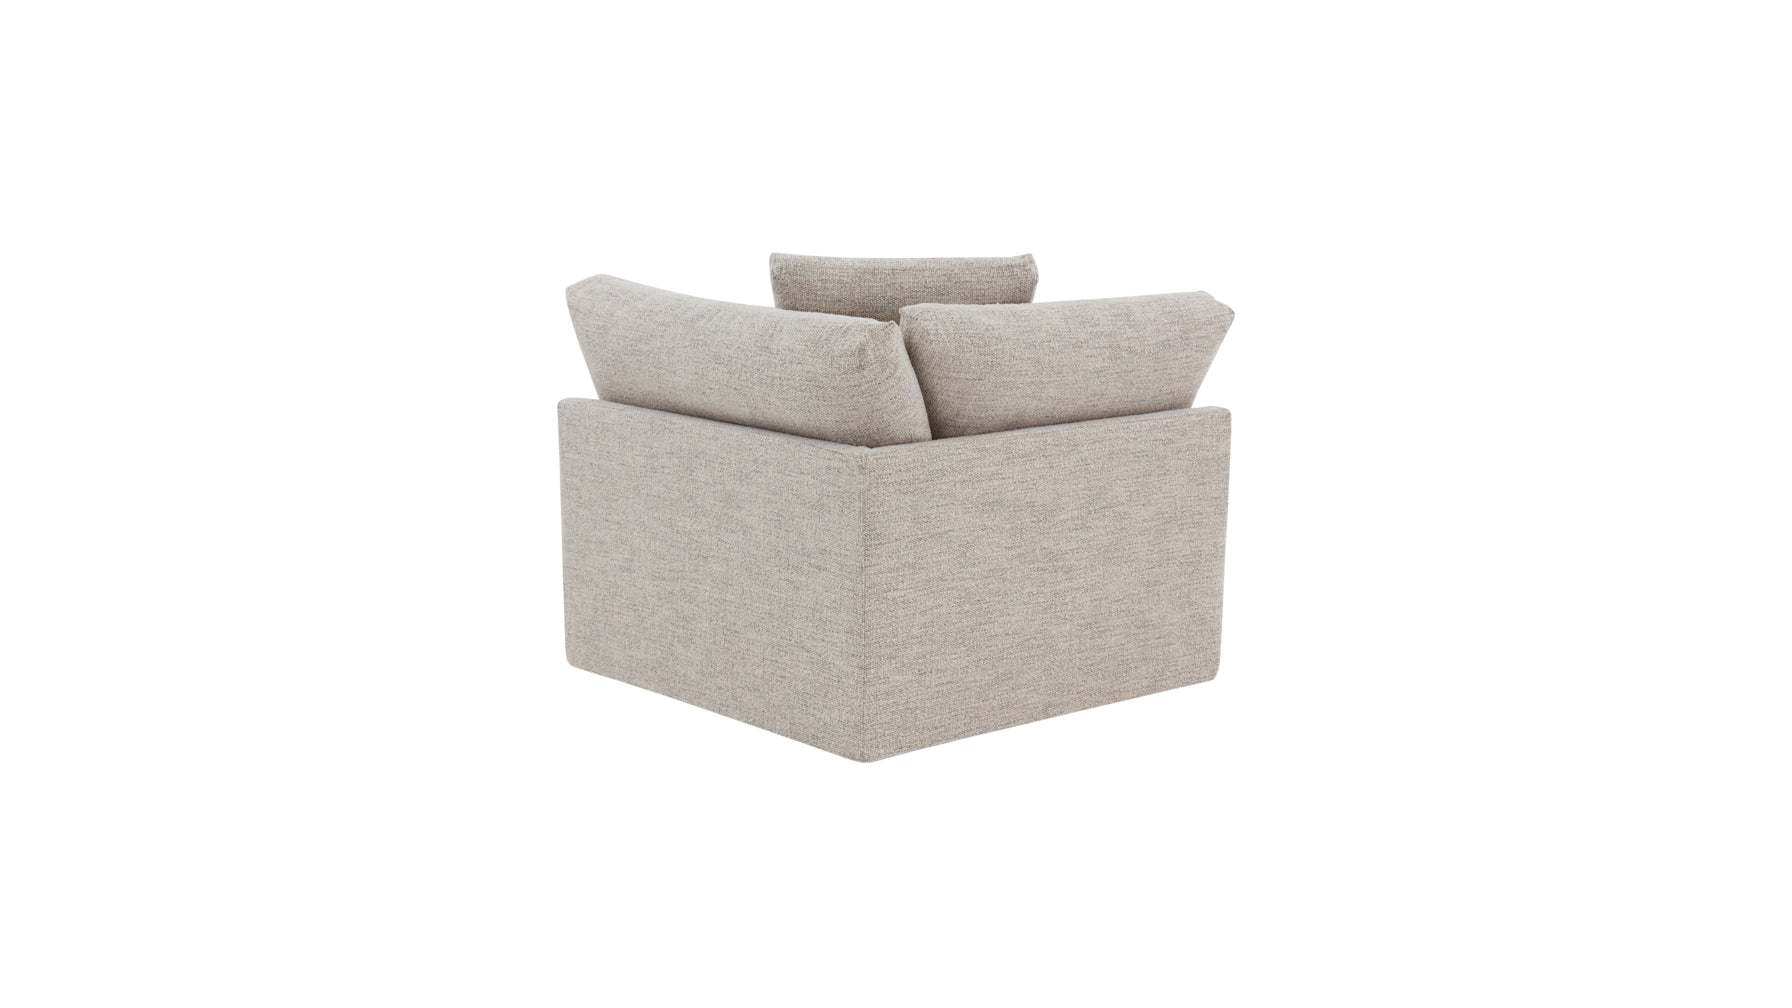 Get Together™ Corner Chair, Large, Oatmeal - Image 7